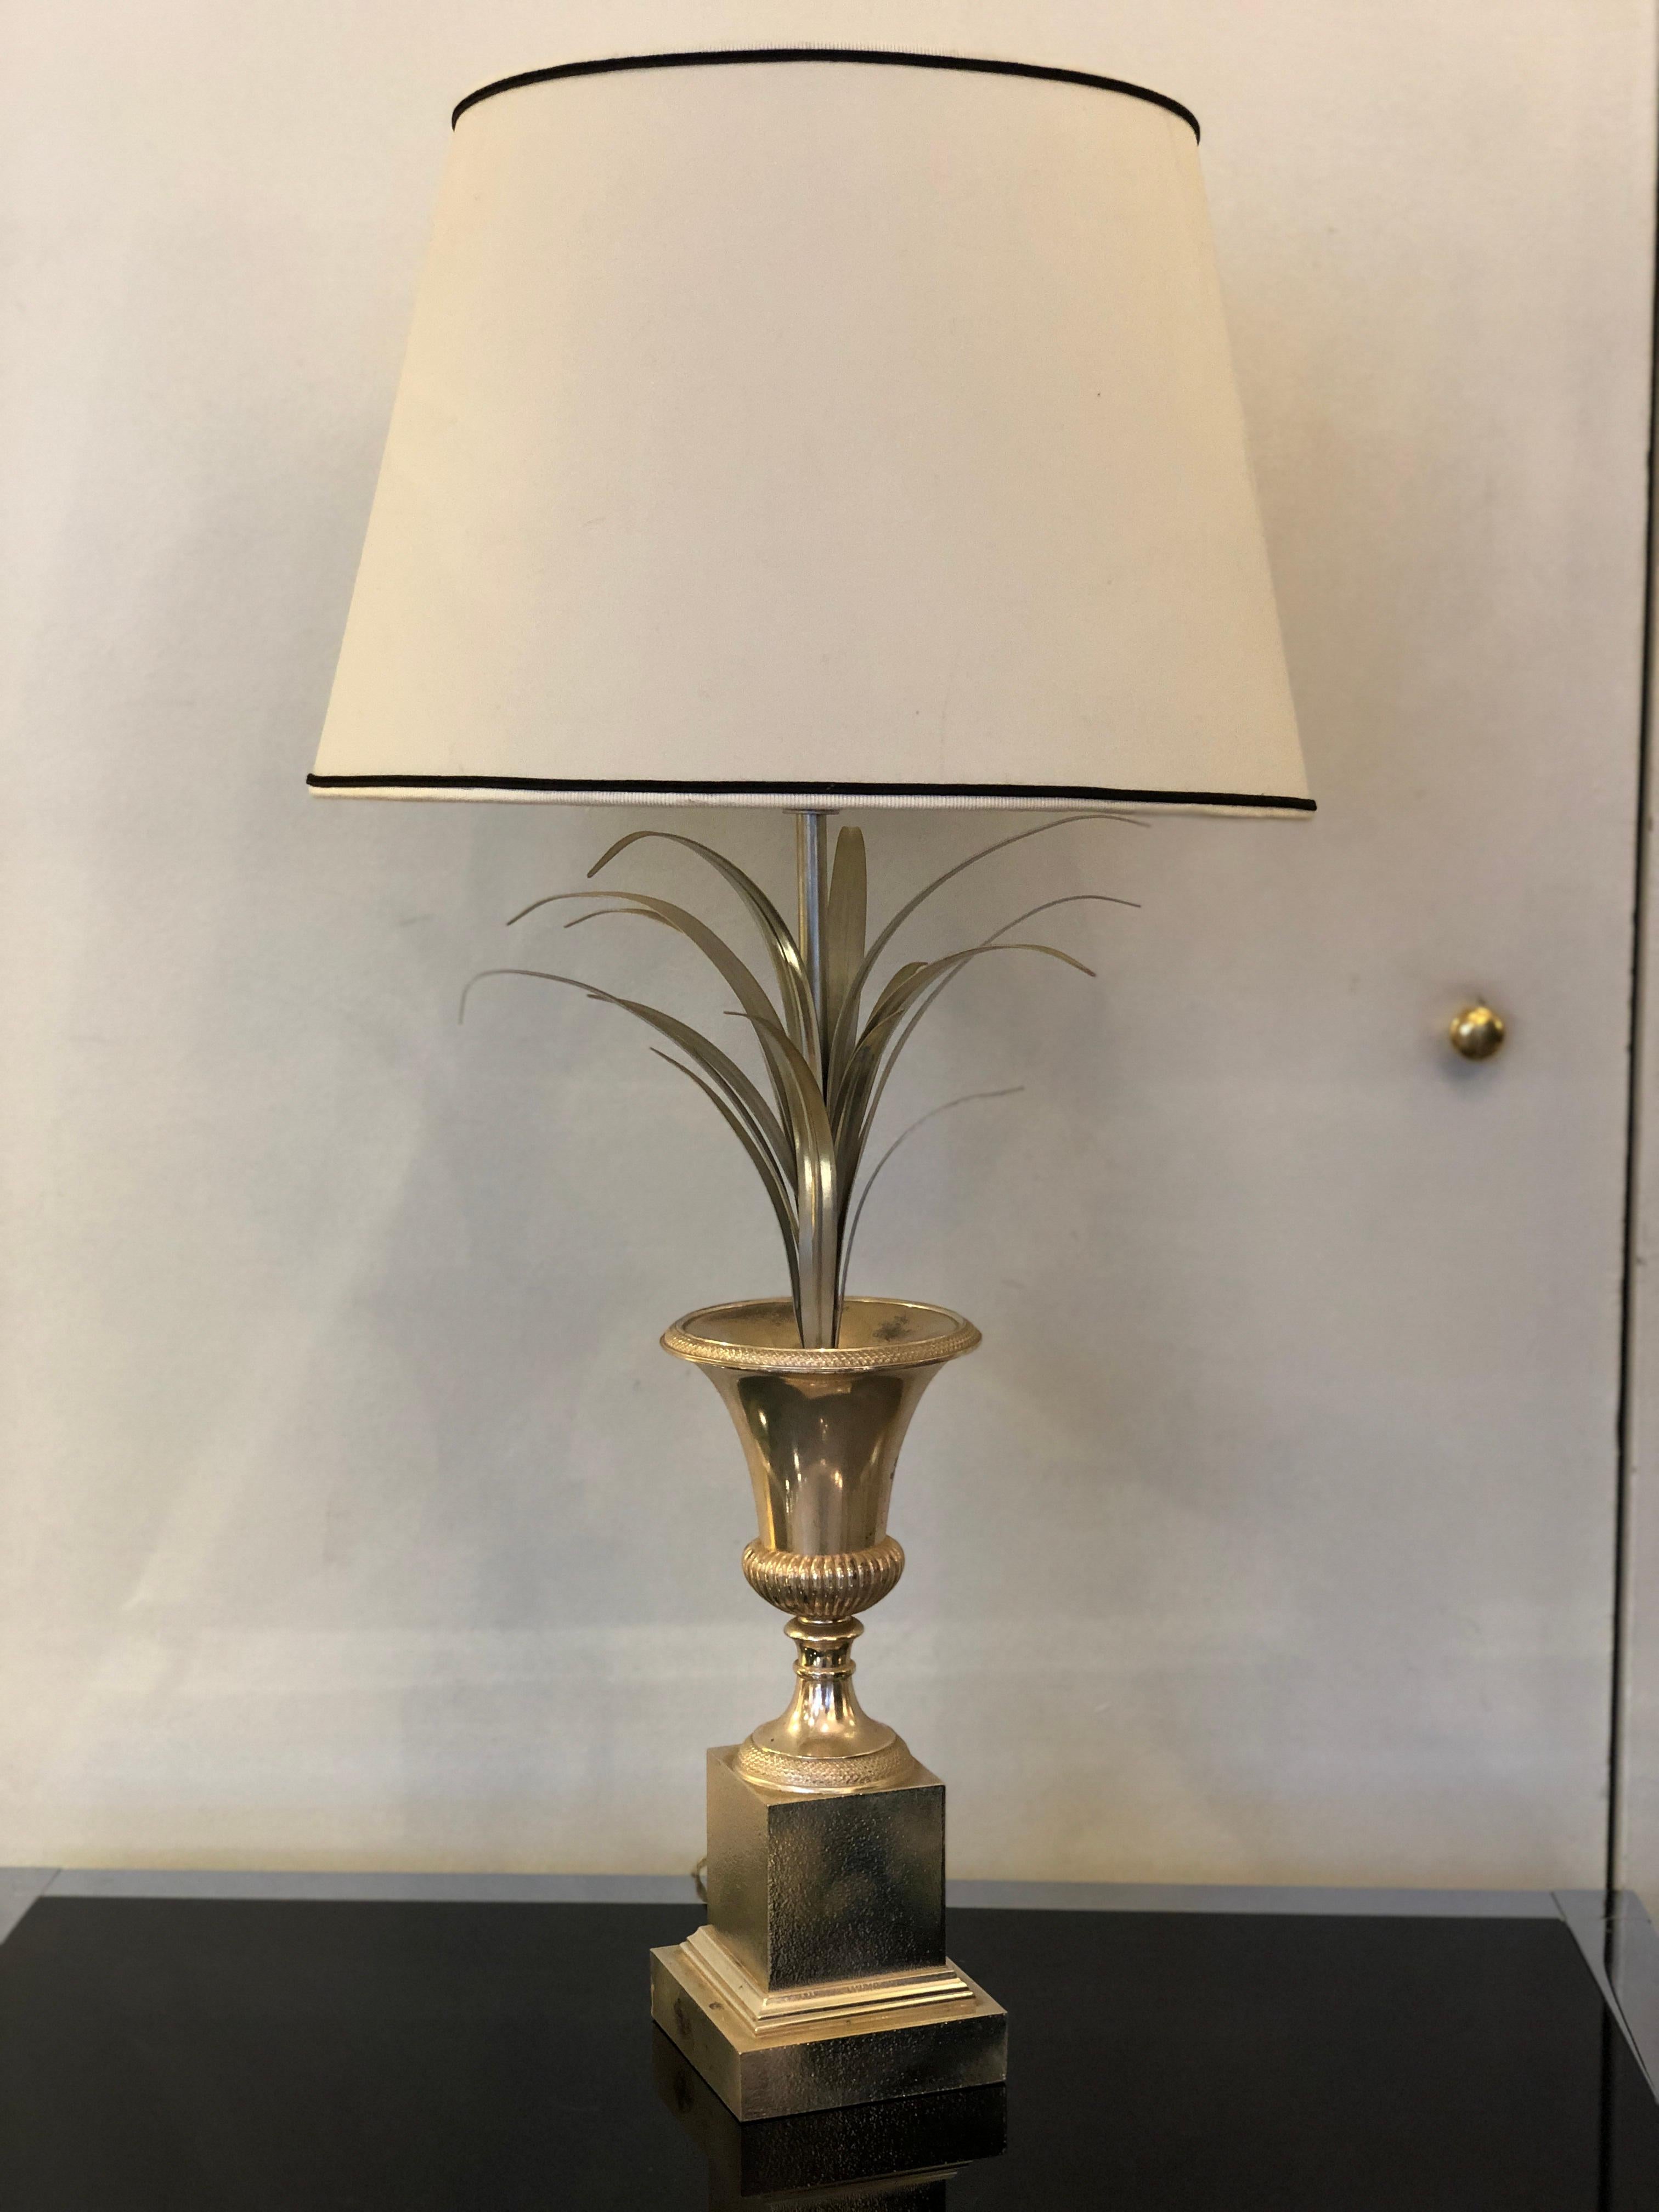 Charles e Fils Silver Metal Palm Floral vase table lamp made in France around 1960s.
The lamp which featuring the typical flowers vase shape by Charles a Fils production is from France from 1960s period.
The lampshade is new and customizable, here